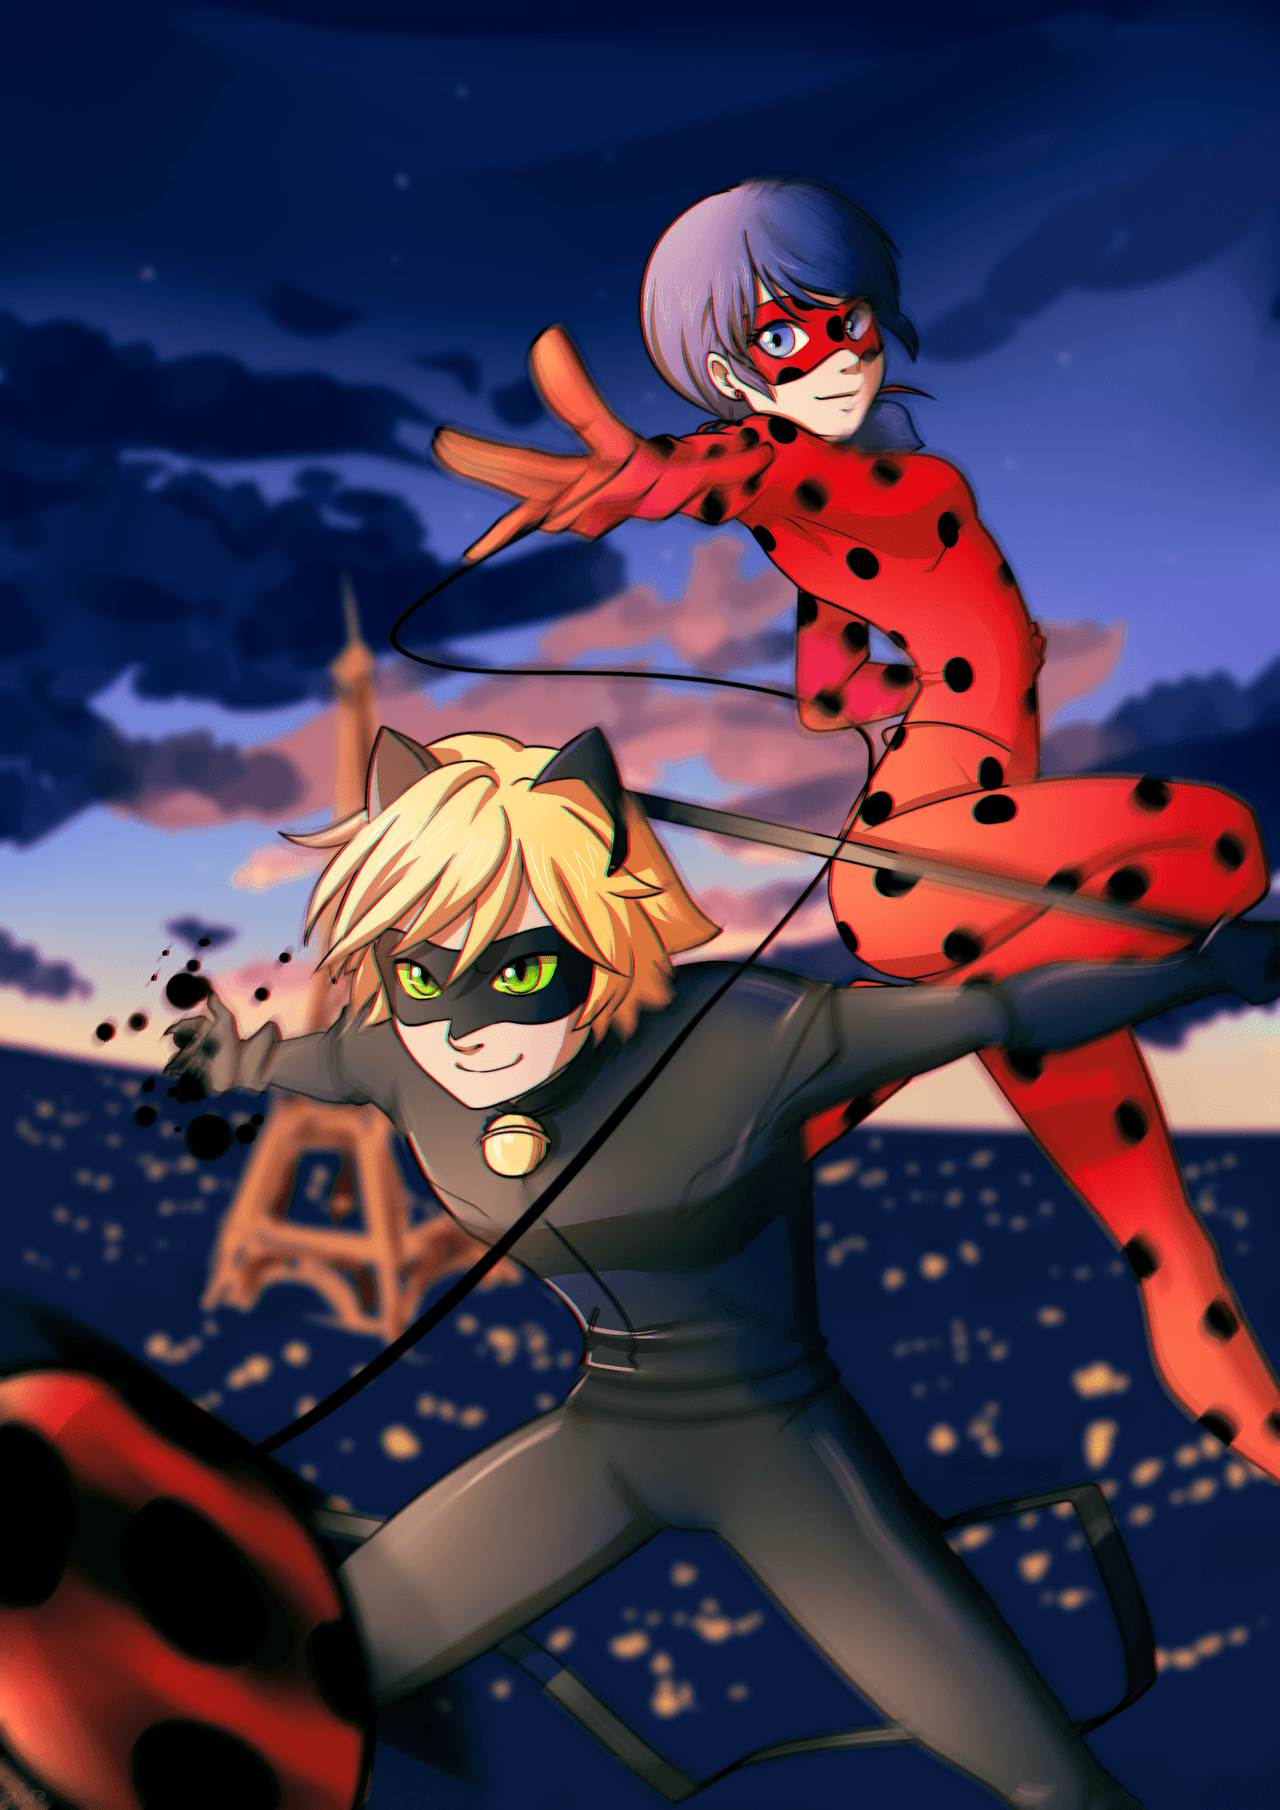 Anime Ladybug And Cat Noir Wallpapers - Wallpaper Cave 087